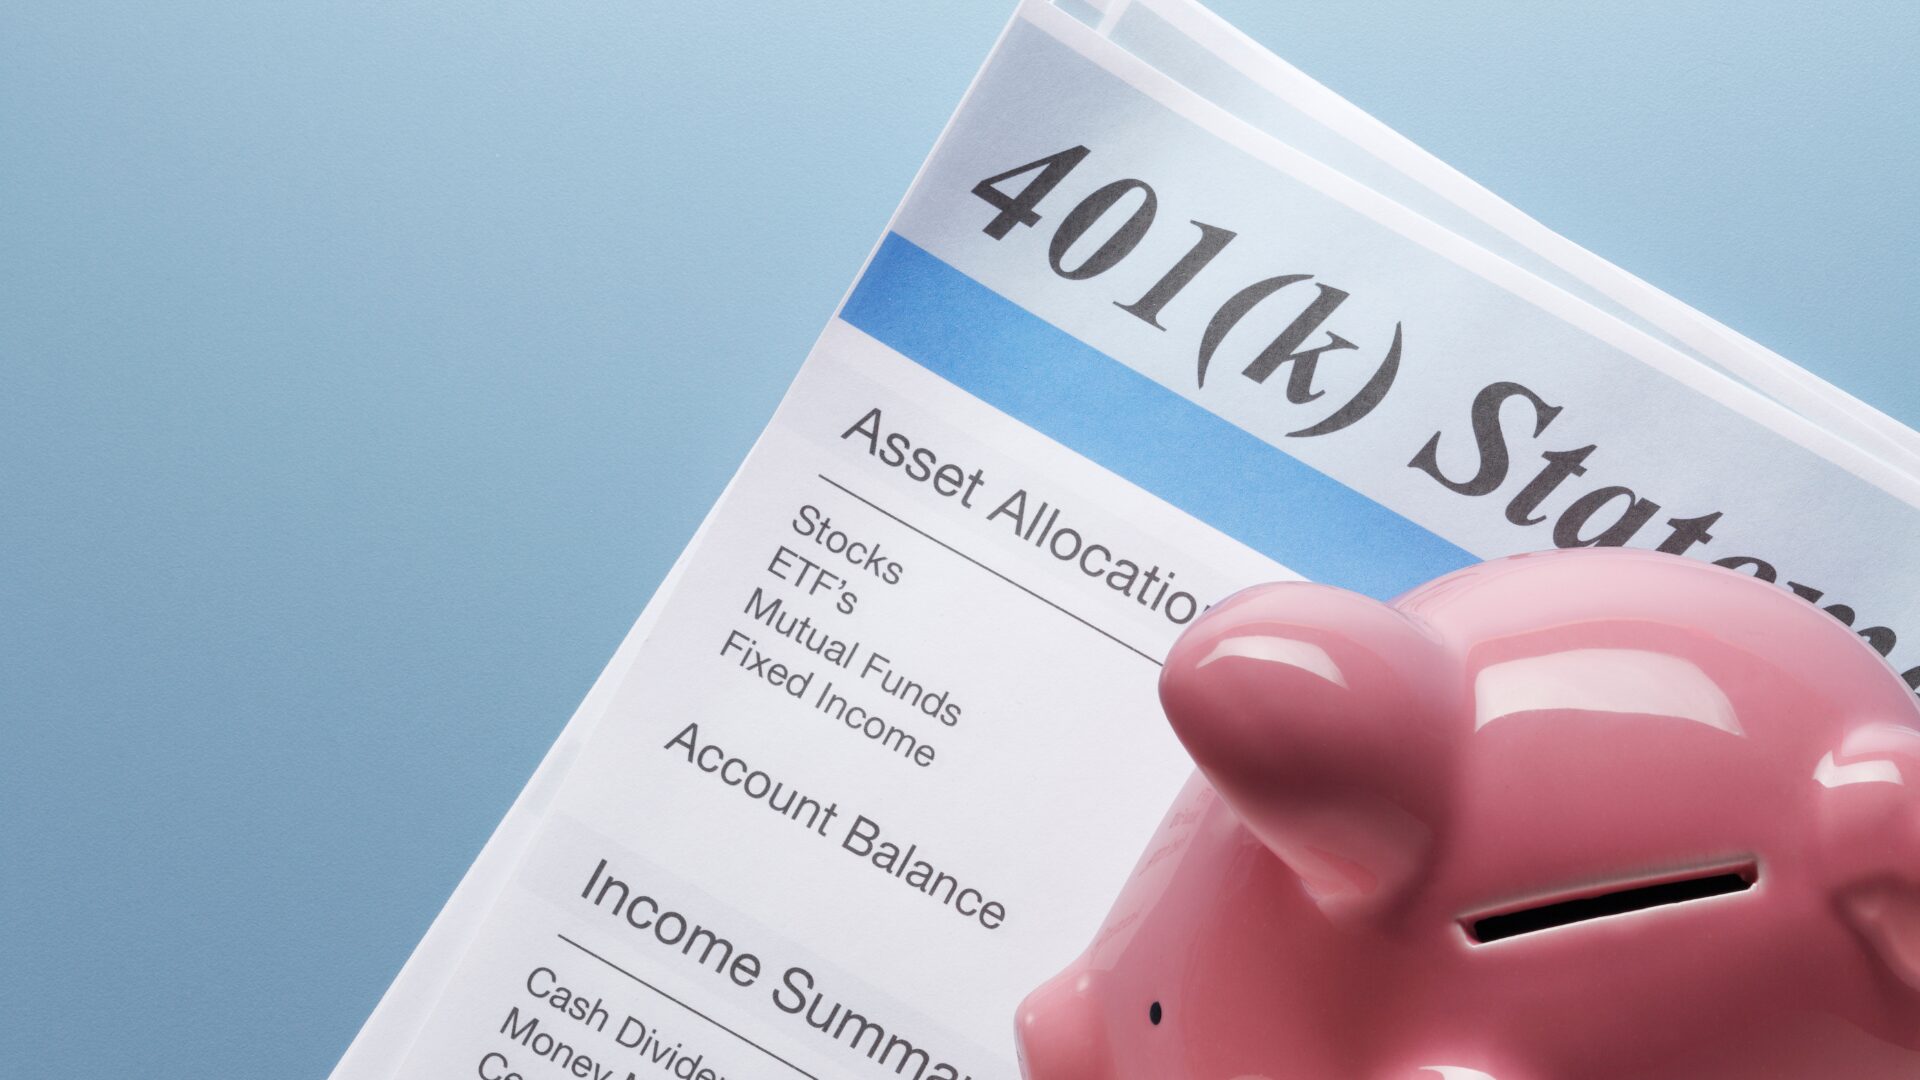 An image showing a person filling out a 401k form, which is the first step in how to start a 401k and monitor your investments and performance.